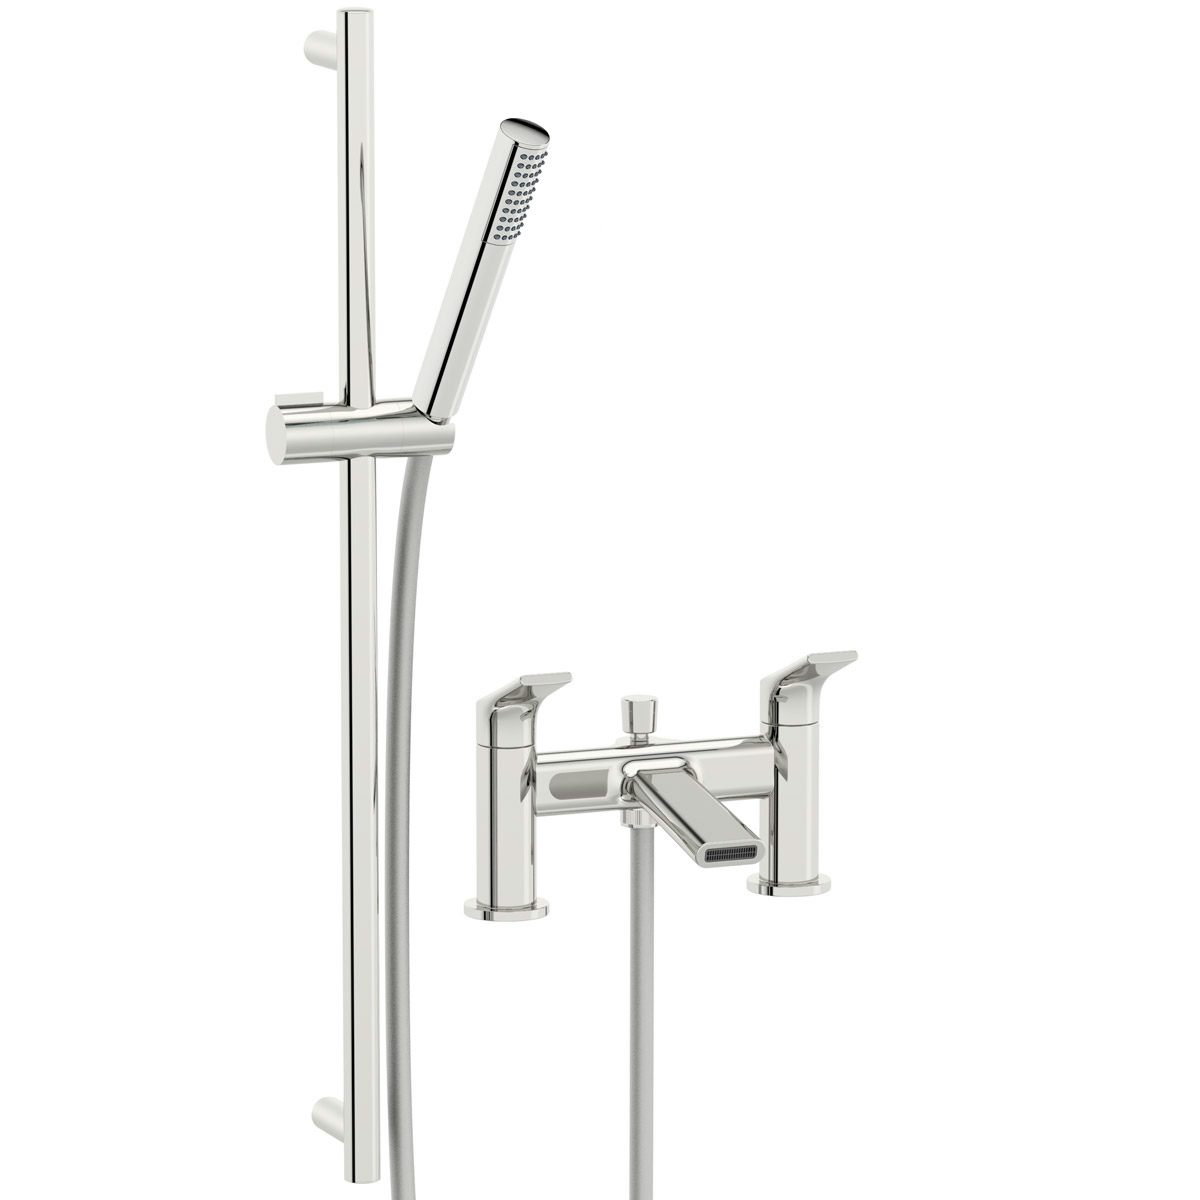 Orchard Purity bath shower mixer tap with slider rail